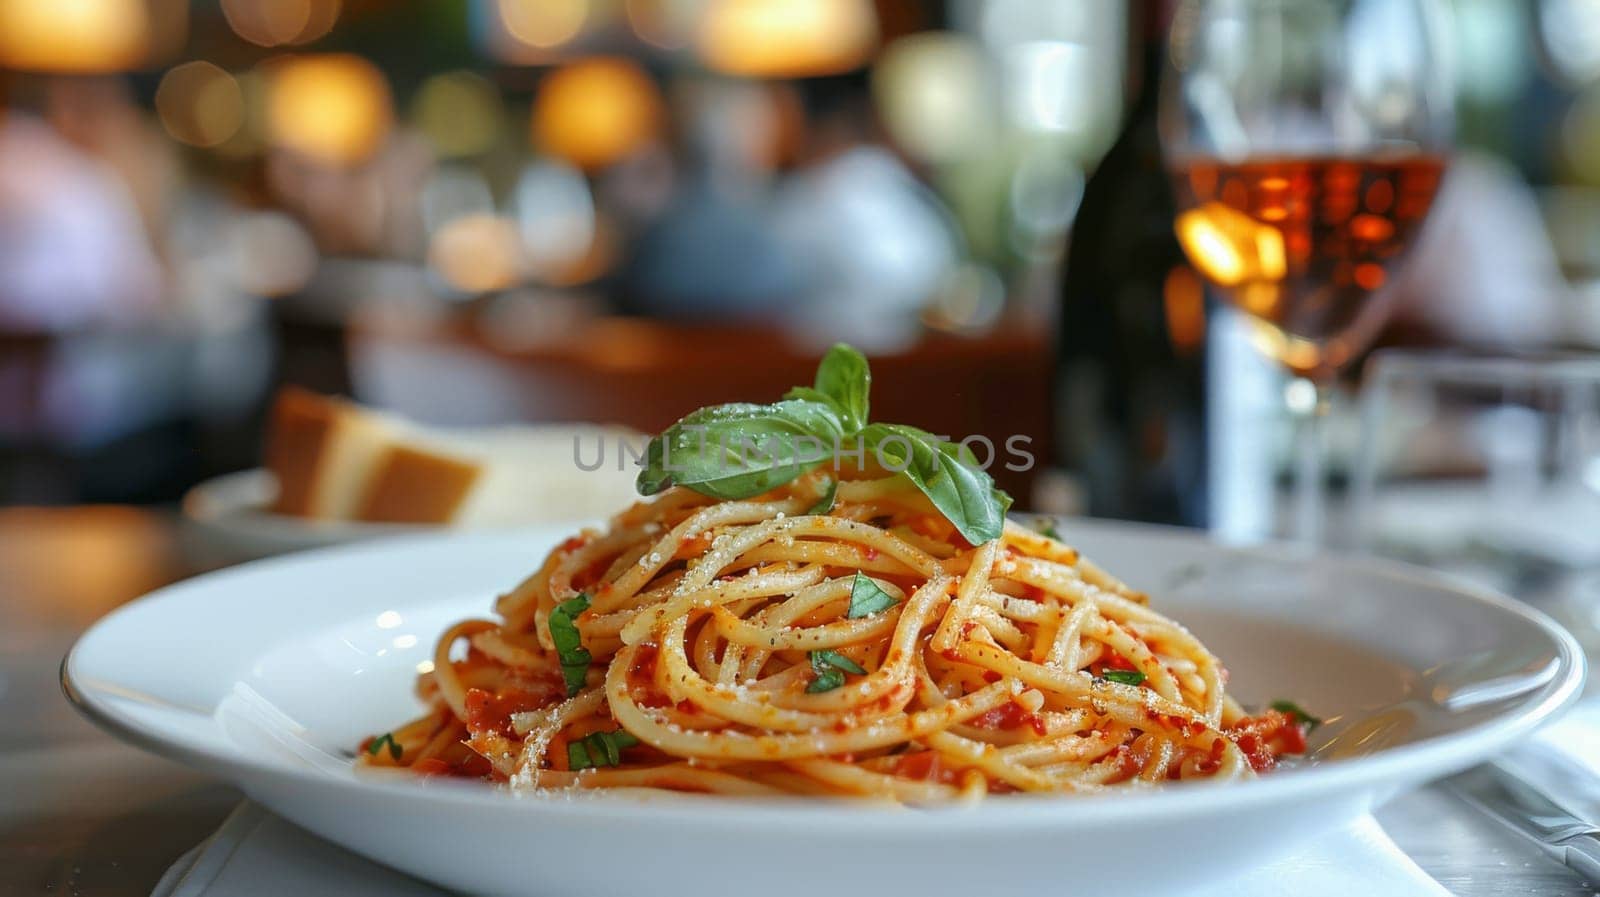 A plate of spaghetti with a glass of wine on a table. The atmosphere is casual and relaxed, with a few people in the background